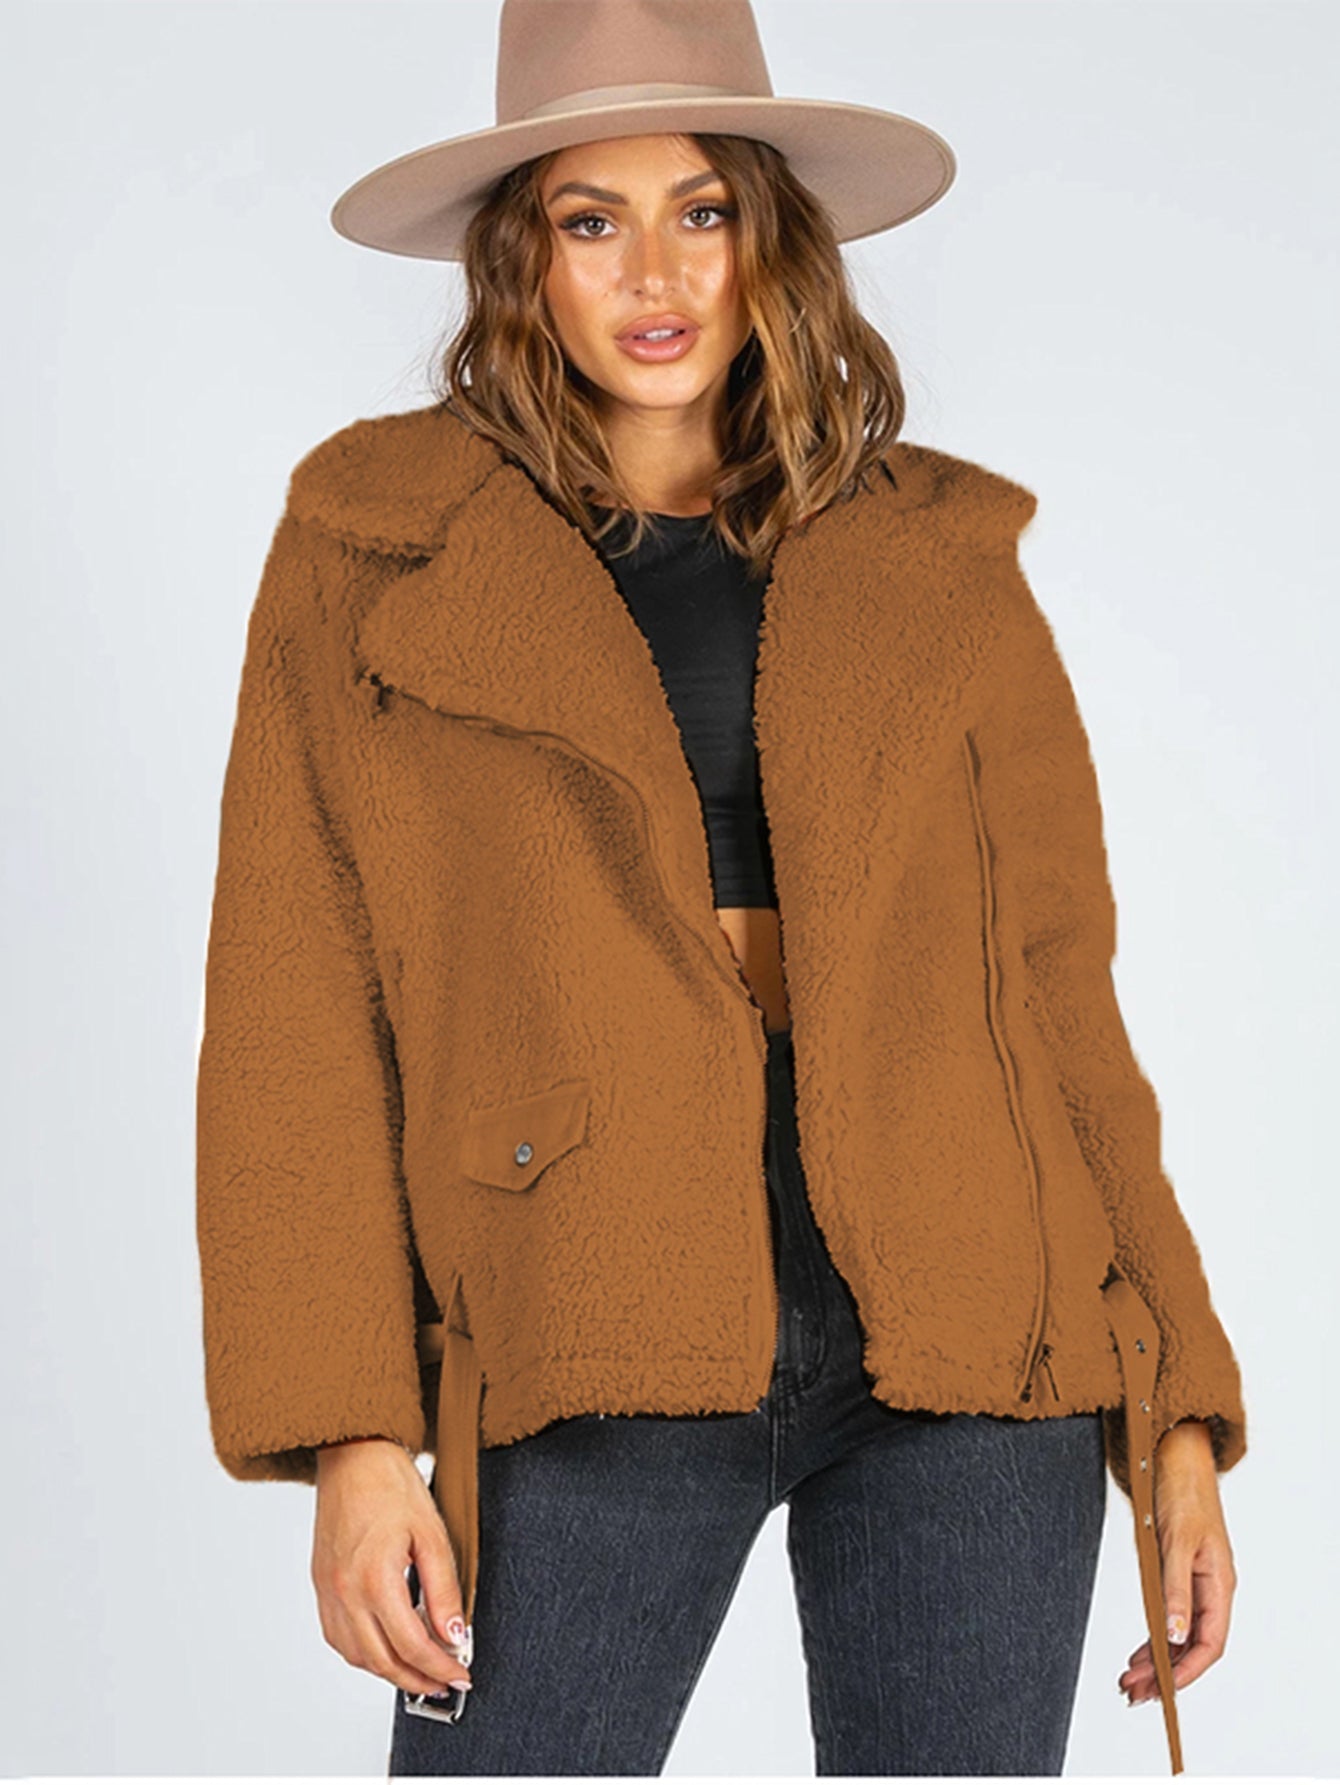 Collared Single Breasted Pocket Front Teddy Coat Sai Feel